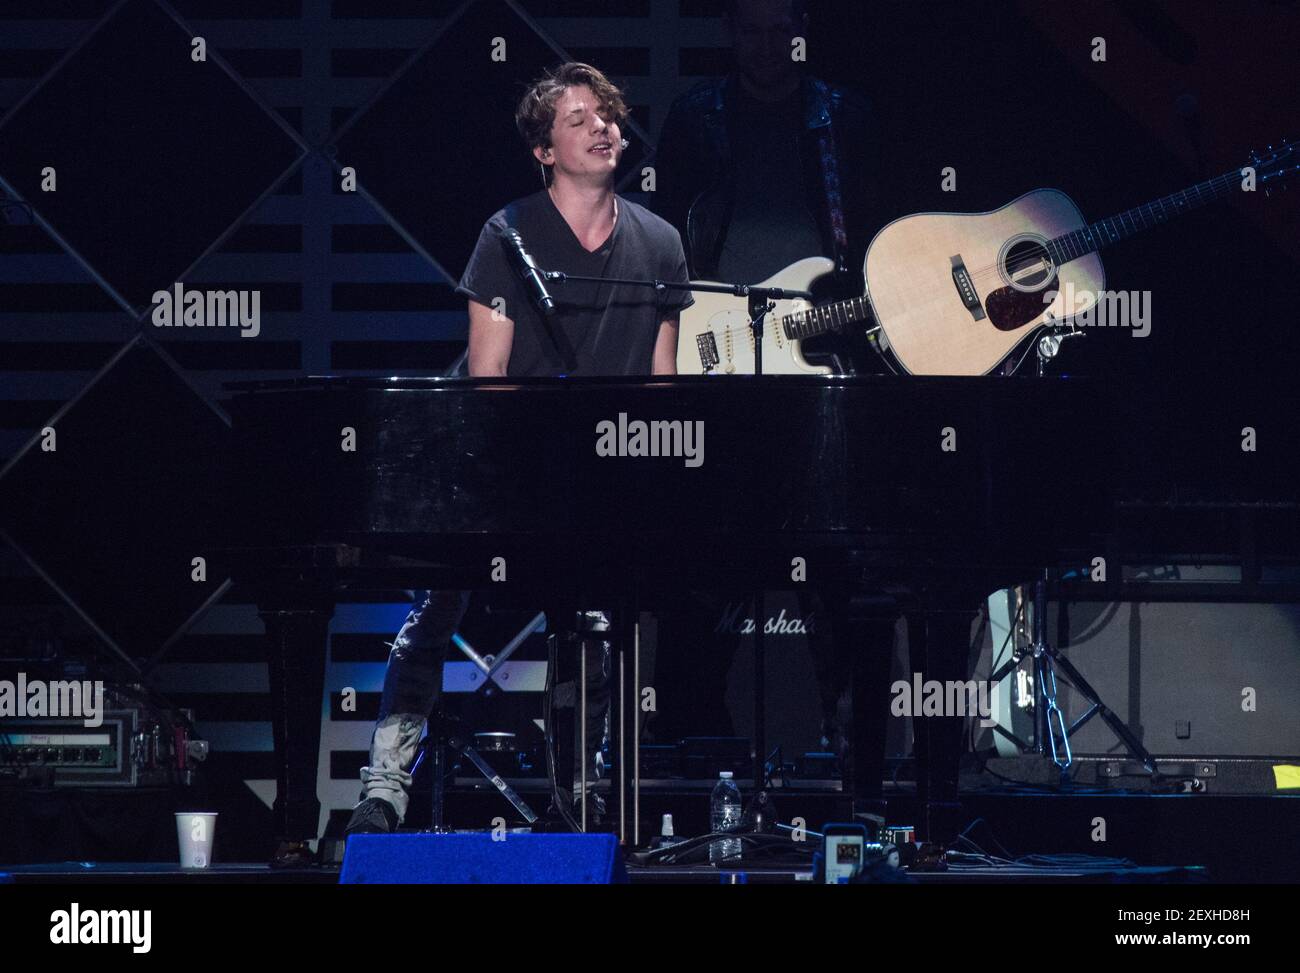 Recording Artist Charlie Puth performs during the WILD 94.9 iHeartRadio Jingle Ball at SAP Center on December 1, 2016 in San Jose, California.(Photo by Chris Tuite/ImageSPACE) *** Please Use Credit from Credit Field *** Stock Photo